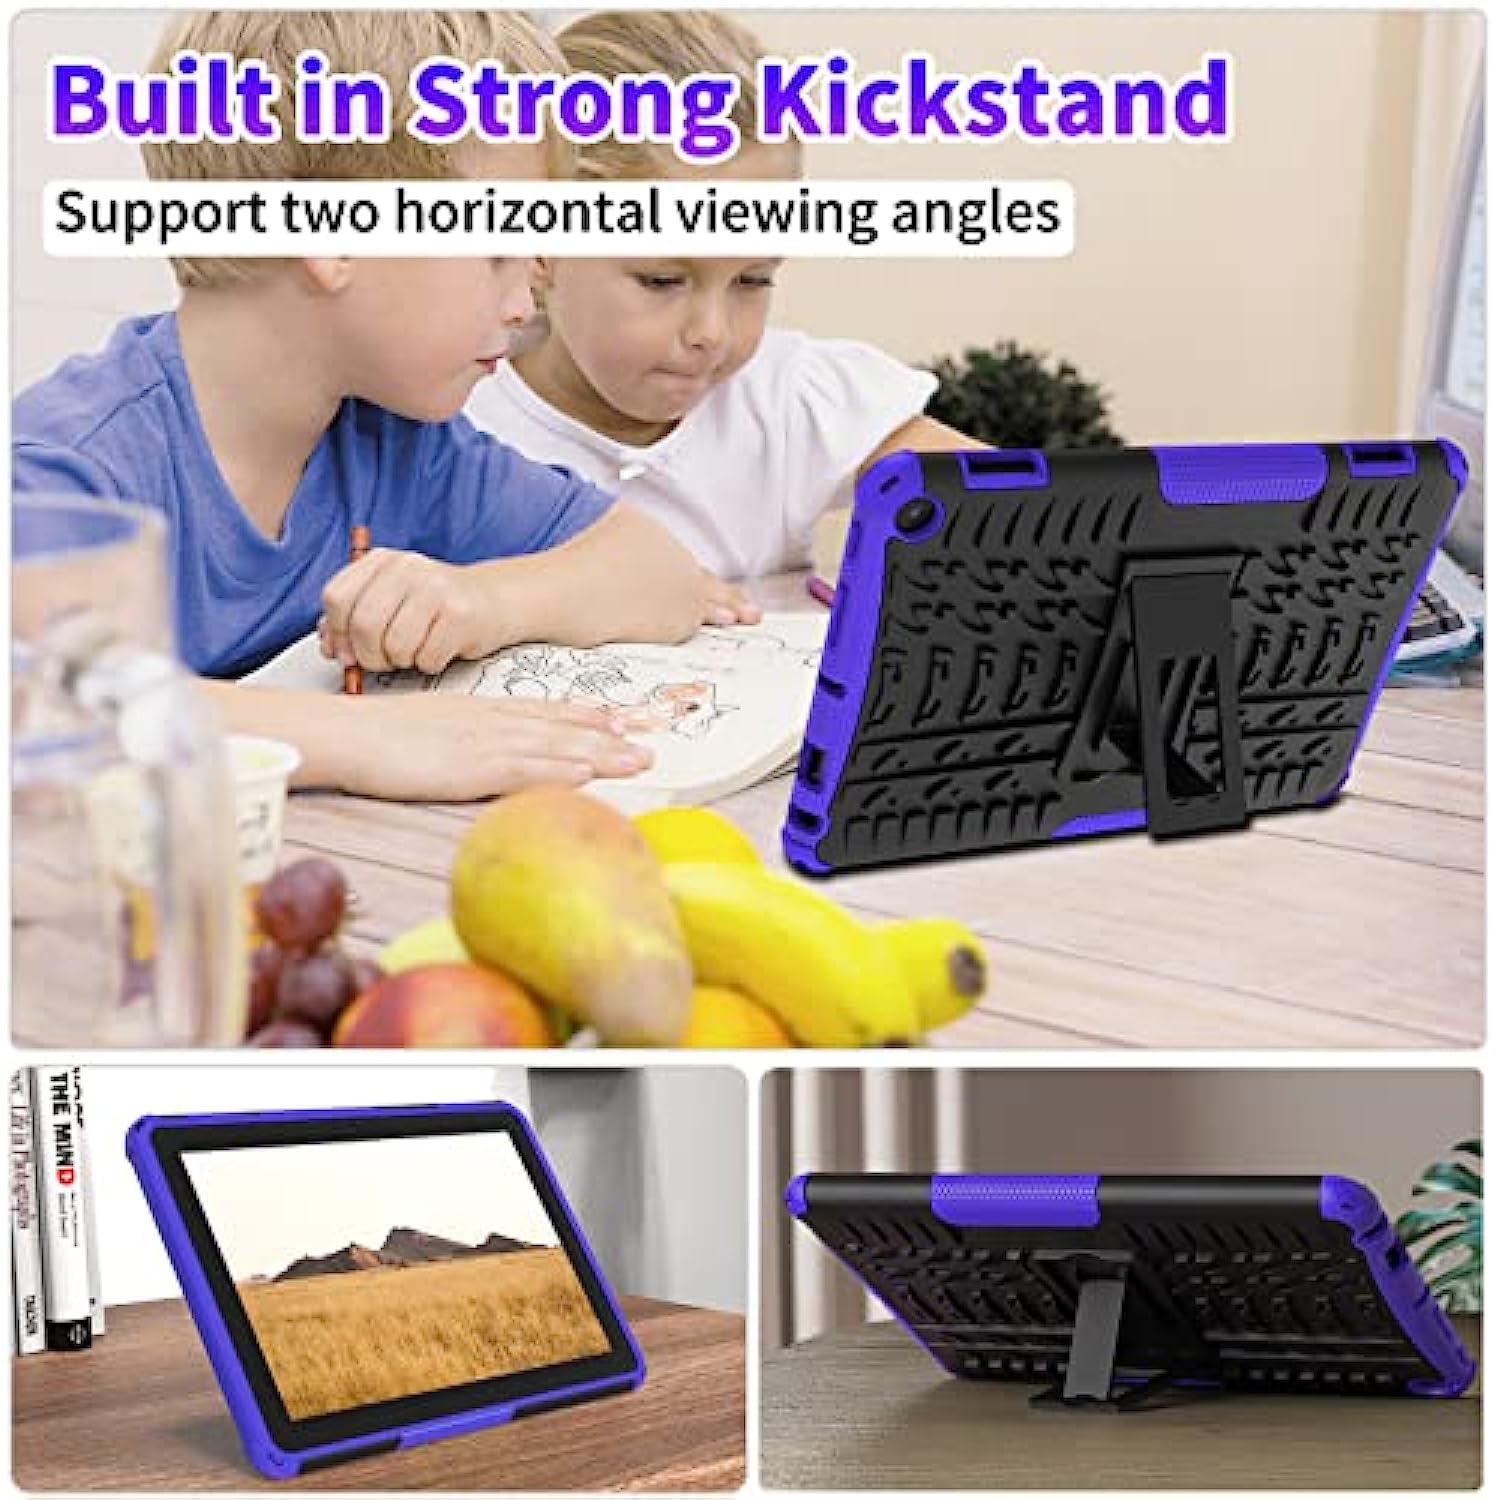 Tablet HD 8 & 8 Plus Case 12th Generation with Kickstand